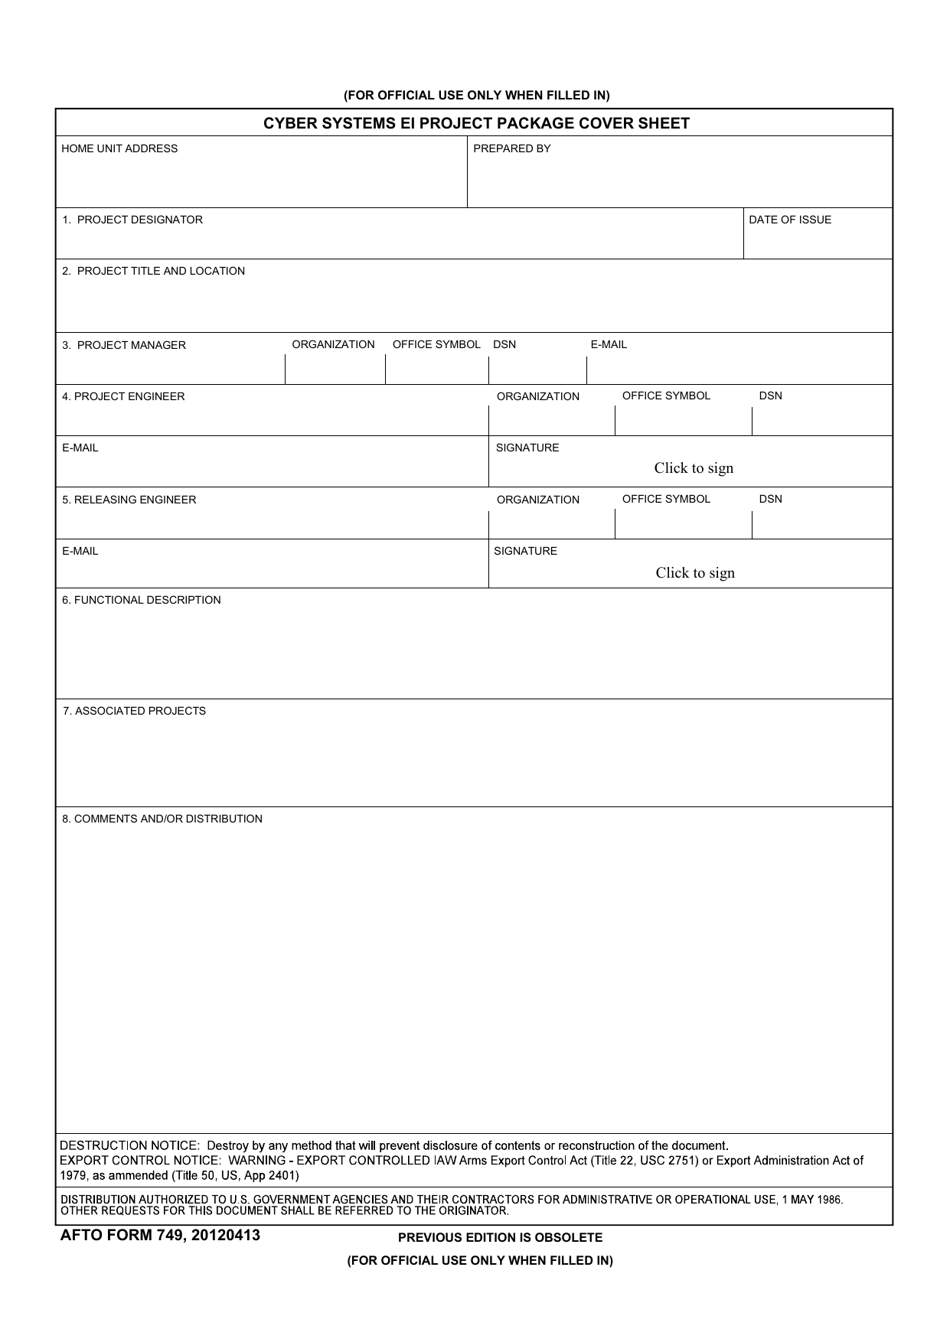 AFTO Form 749 C4 Systems Ei Project Package Cover Sheet, Page 1